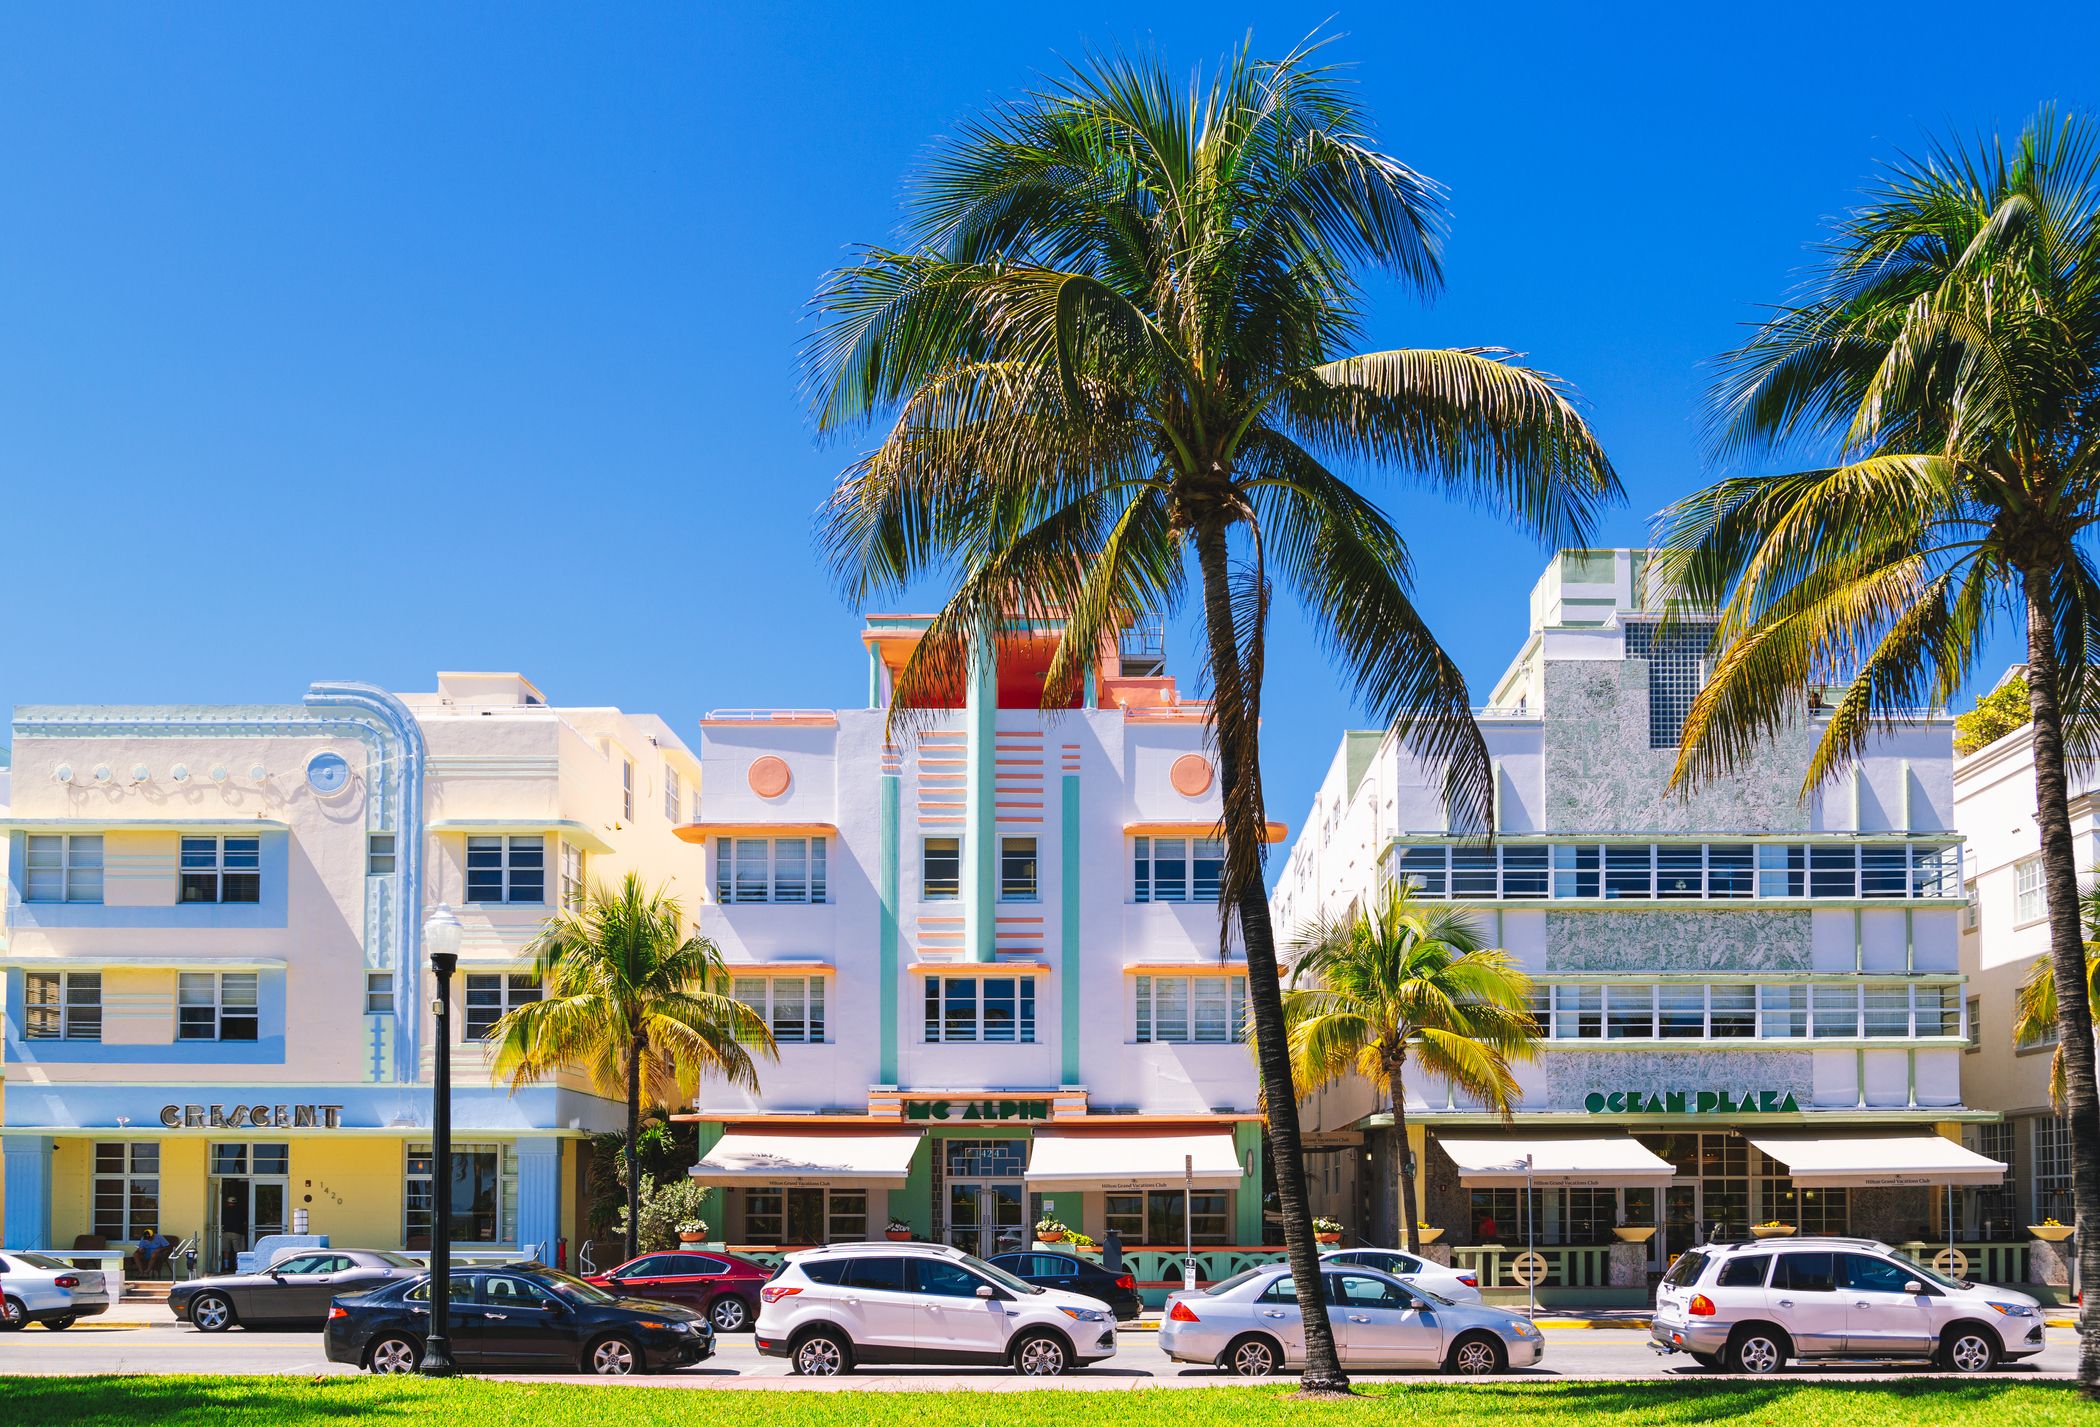 The Best Things to Do in Miami